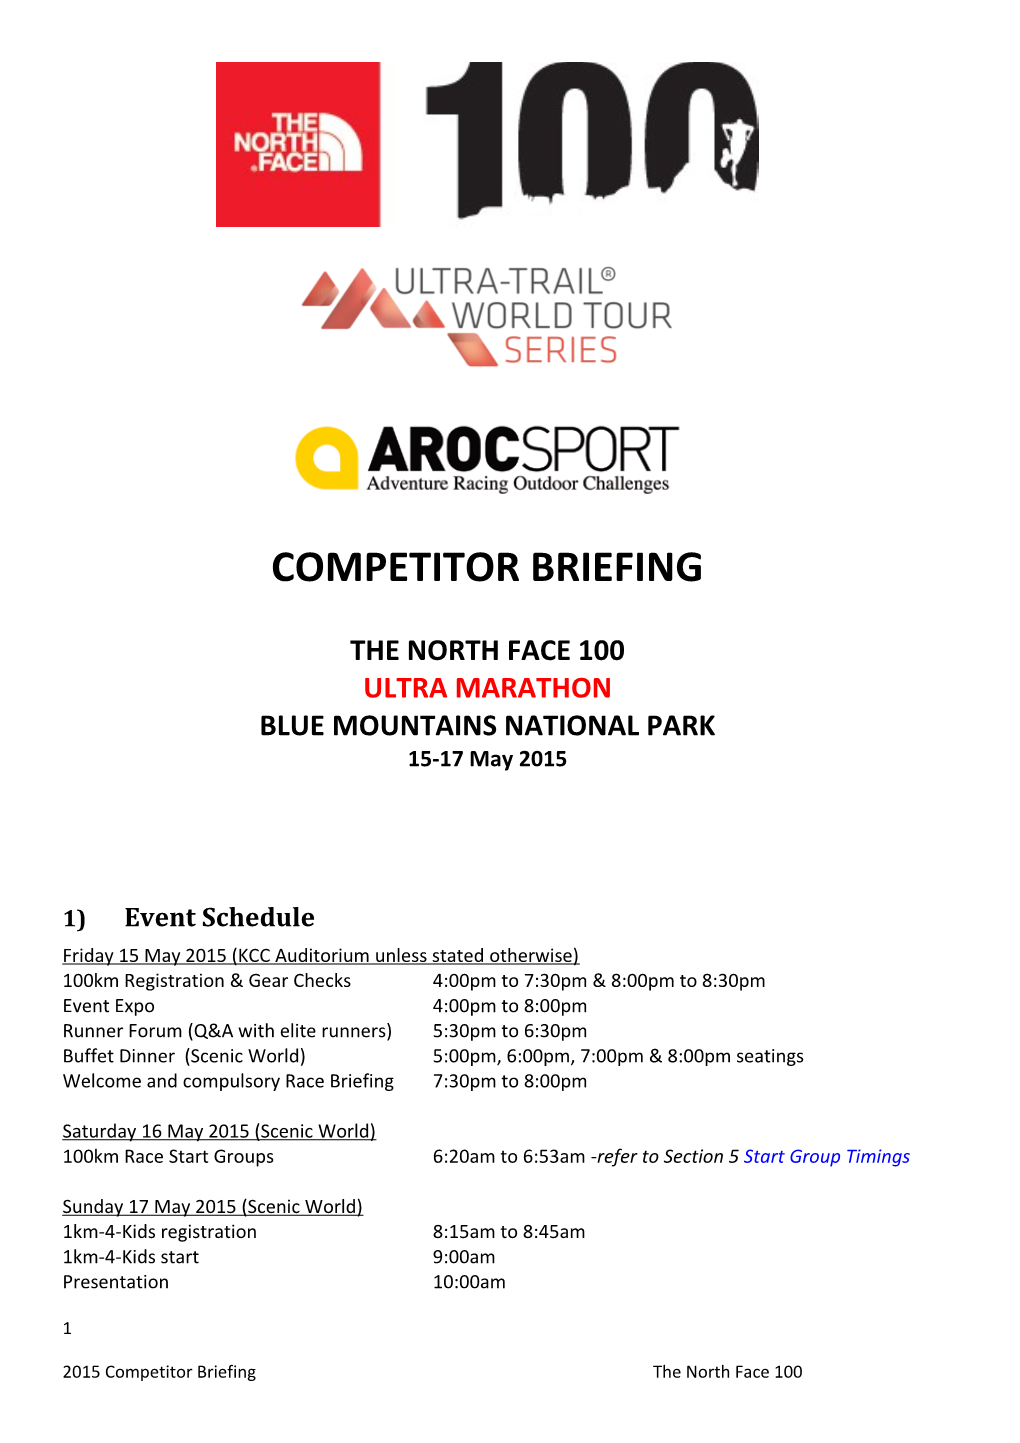 Competitor Briefing